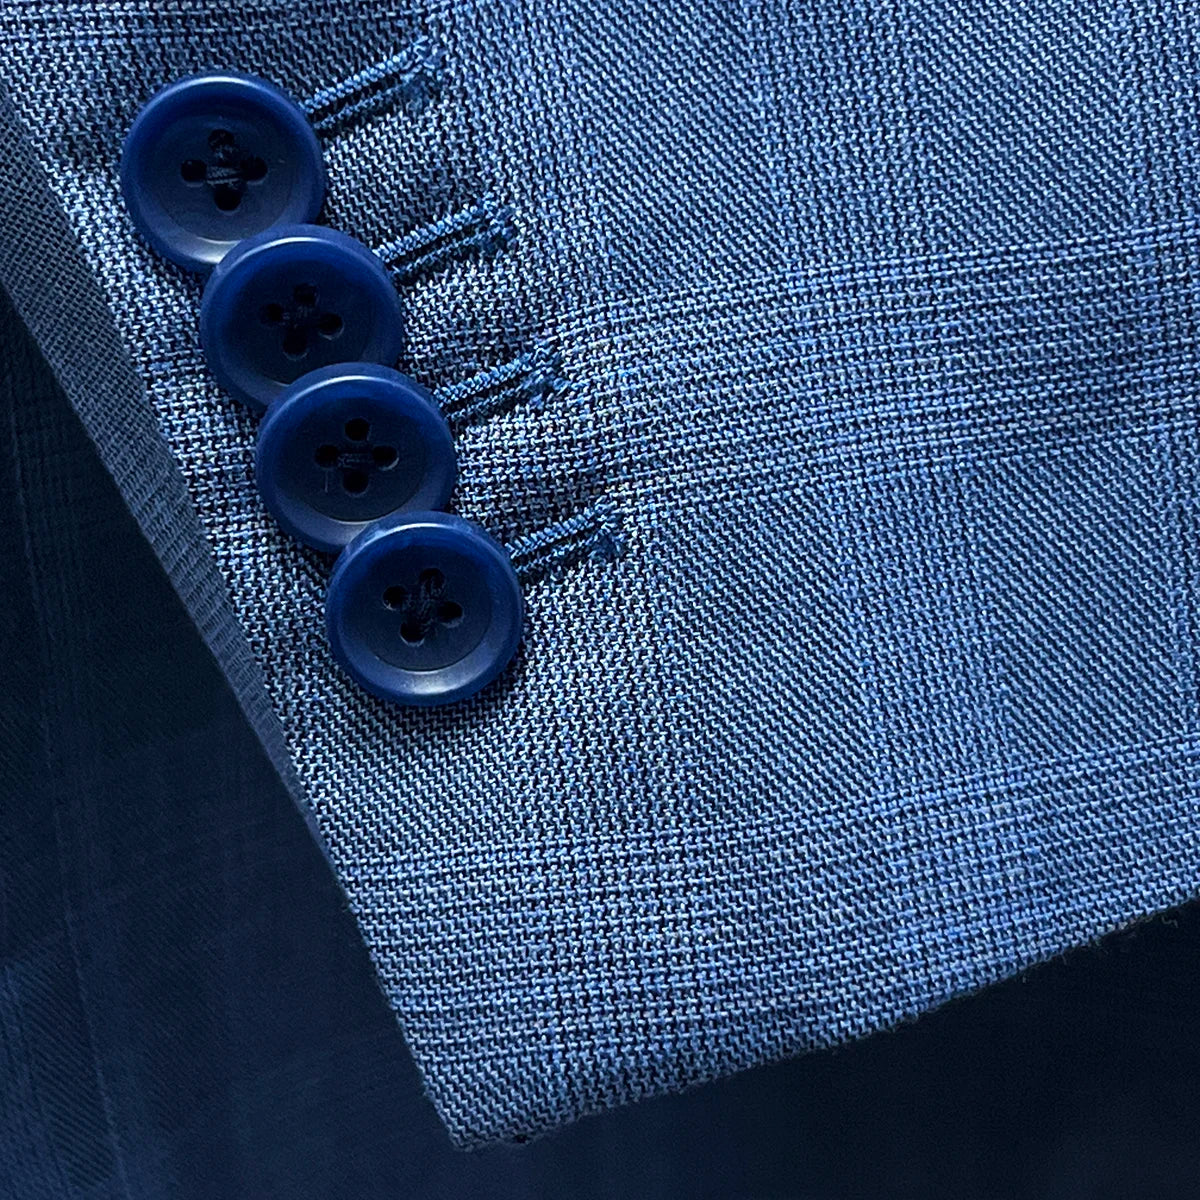 Close-up of the functional overlapping kissing buttons on the sleeve of the suit jacket.